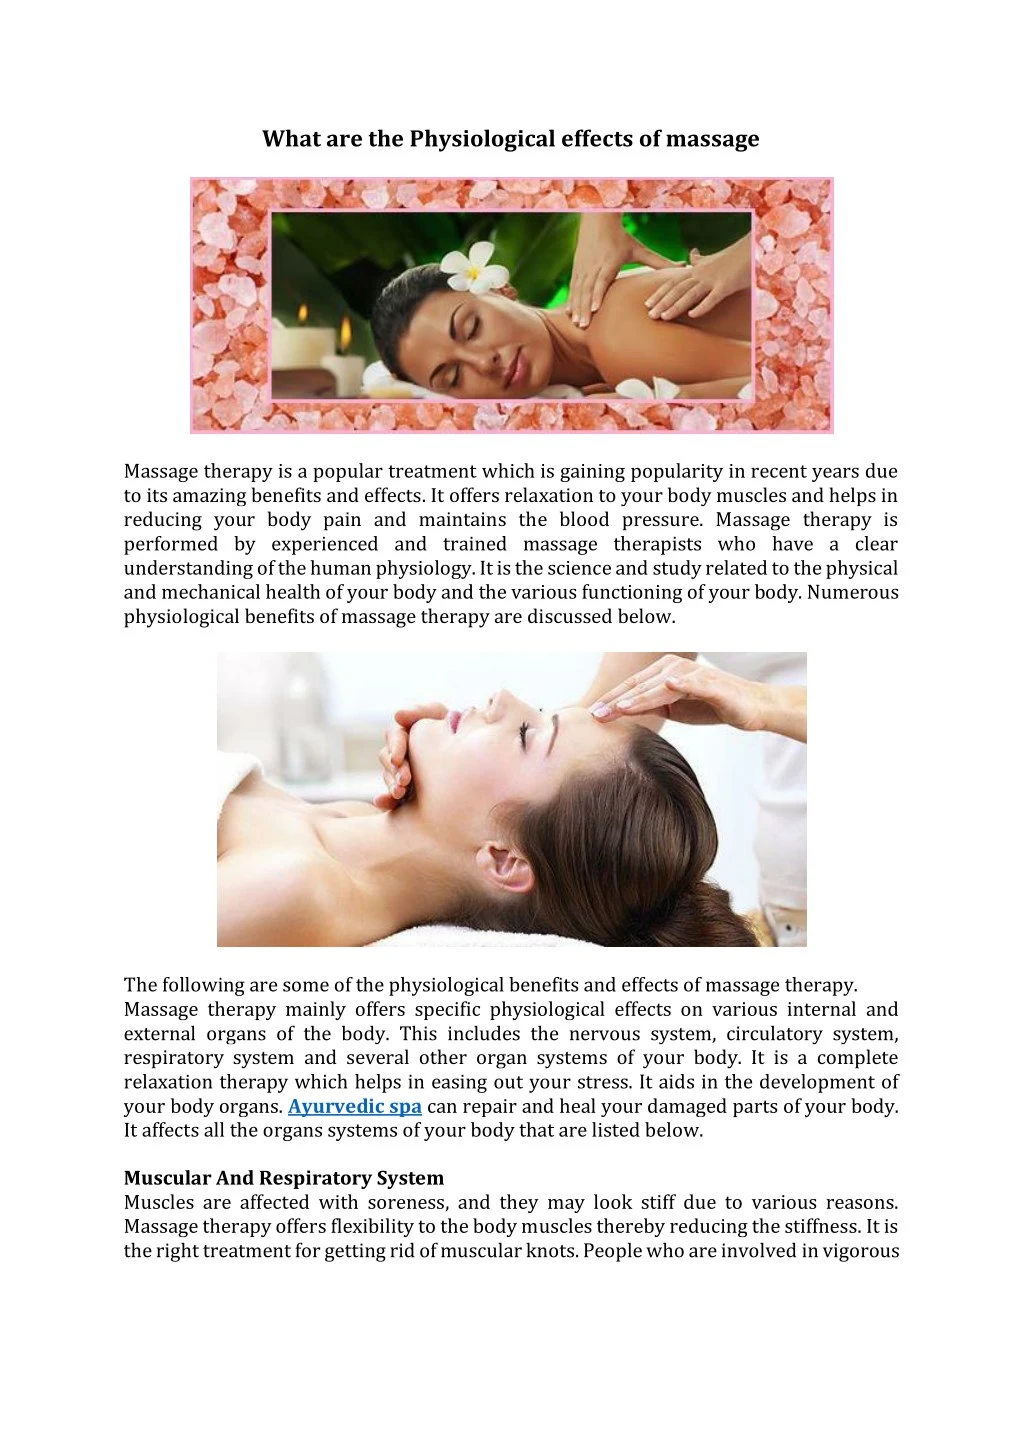 what are the physiological effects of massage